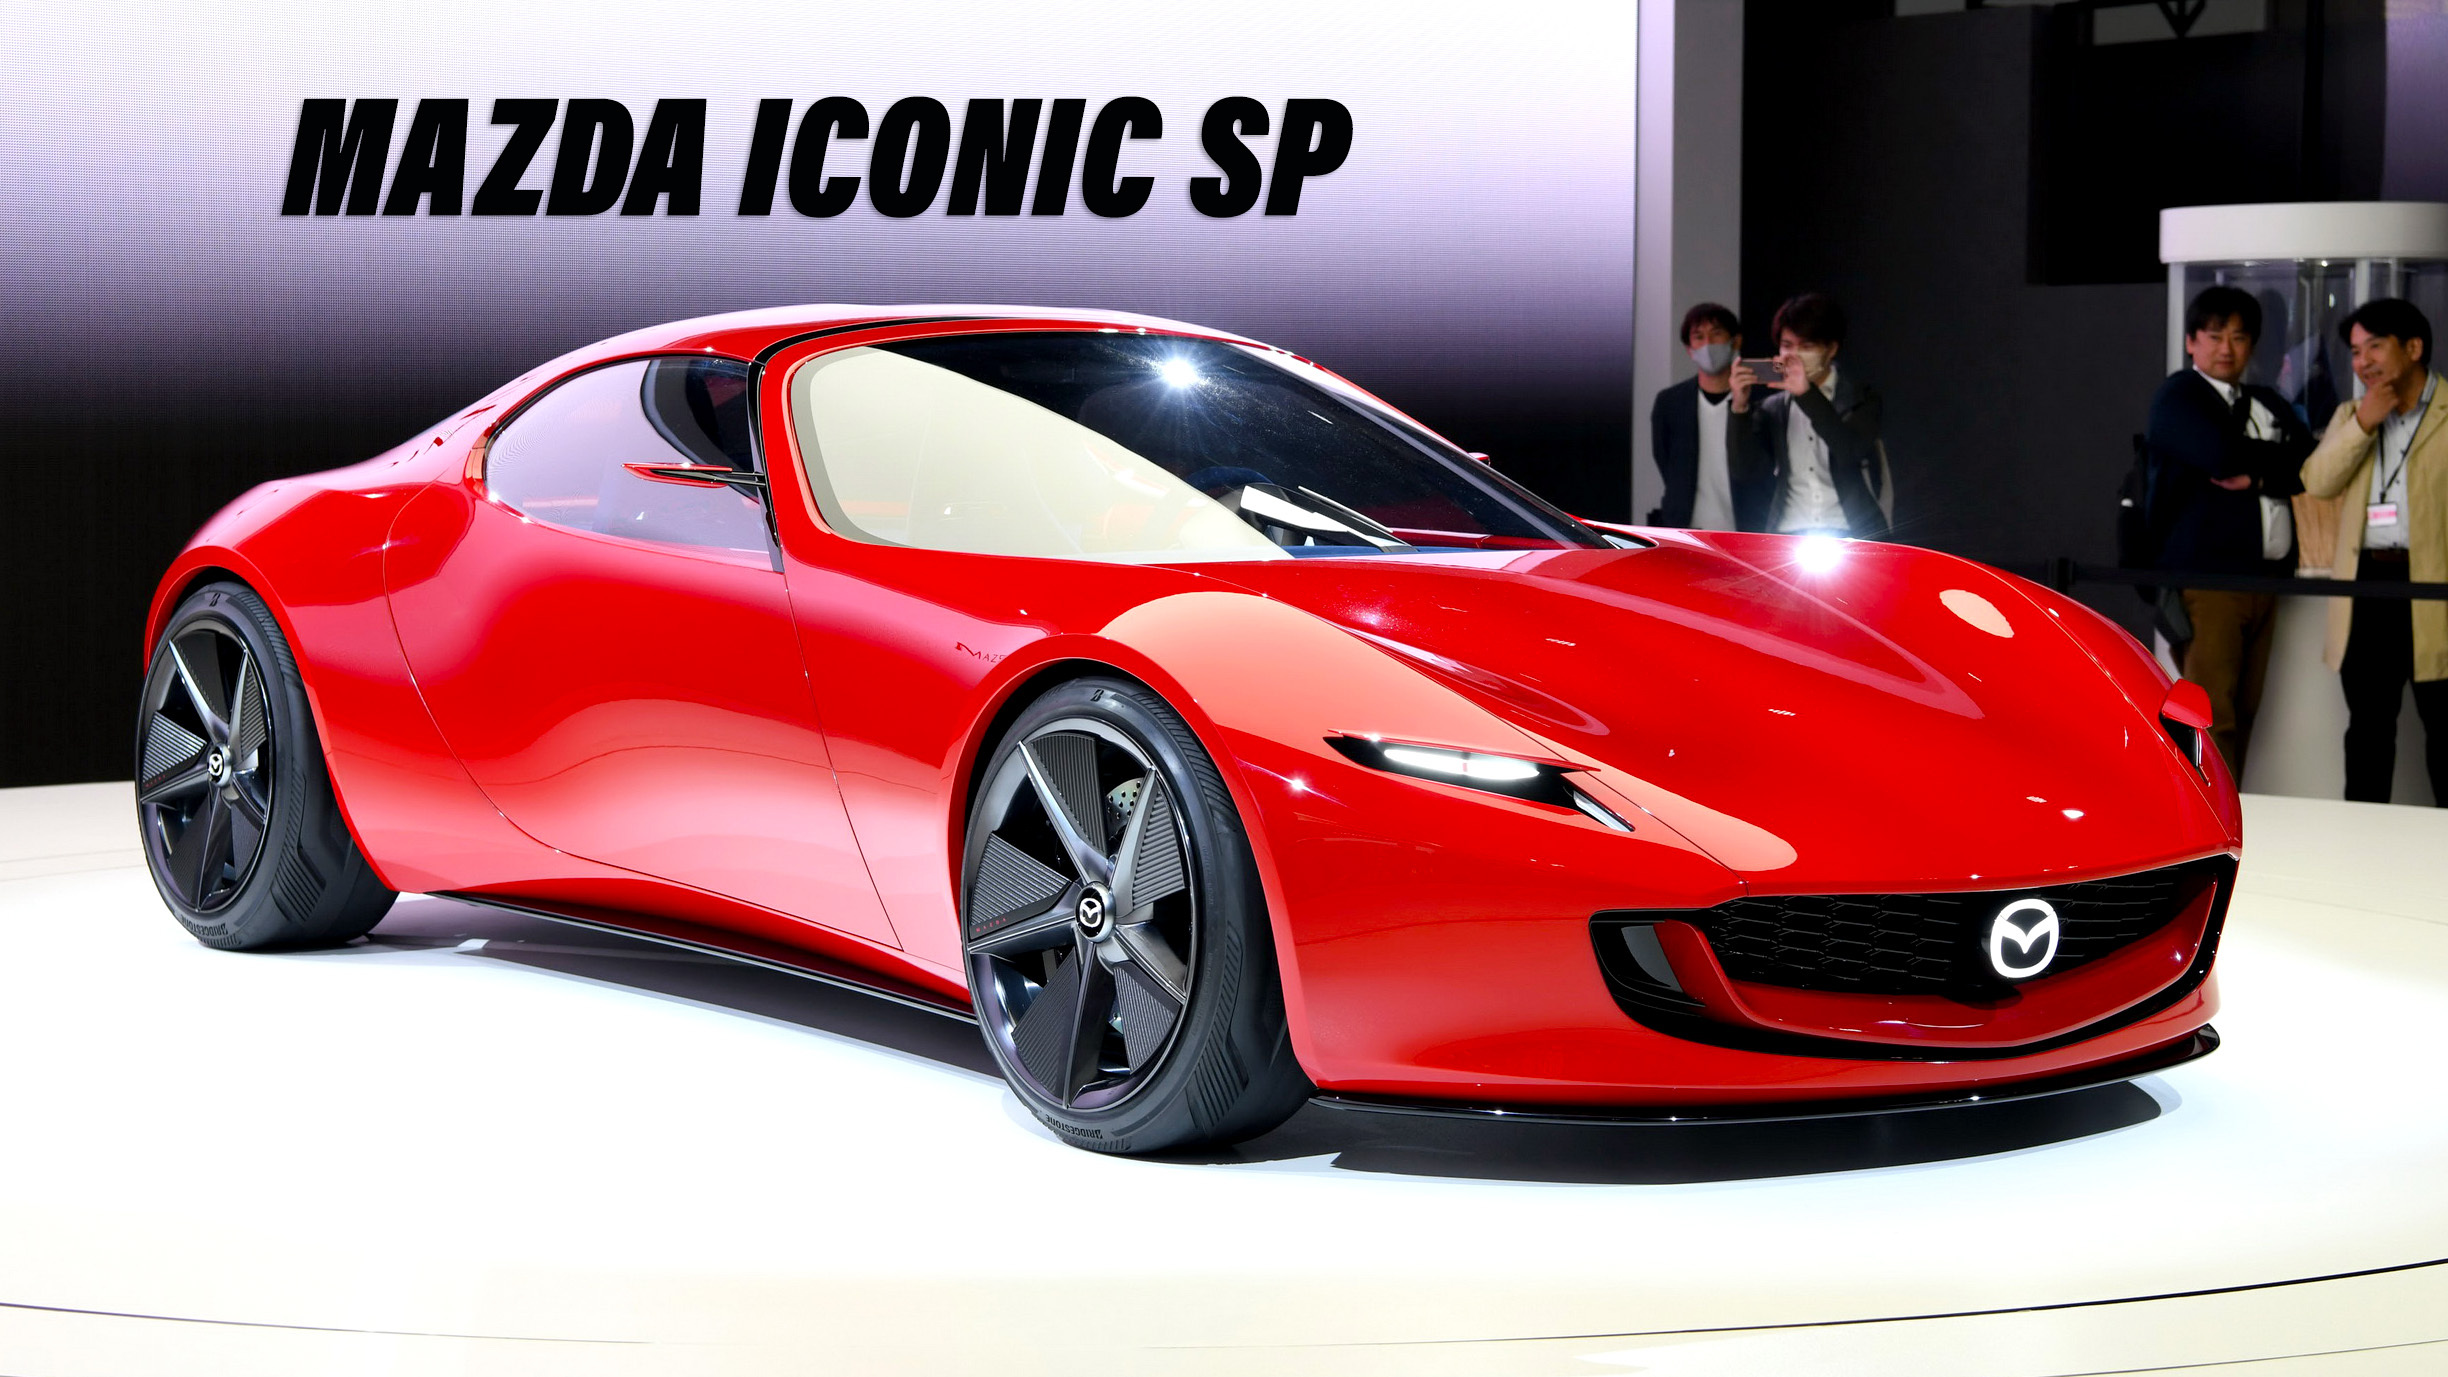 MAZDA NEWSROOM｜Mazda unveils 'MAZDA ICONIC SP' compact sports car concept｜NEWS  RELEASES